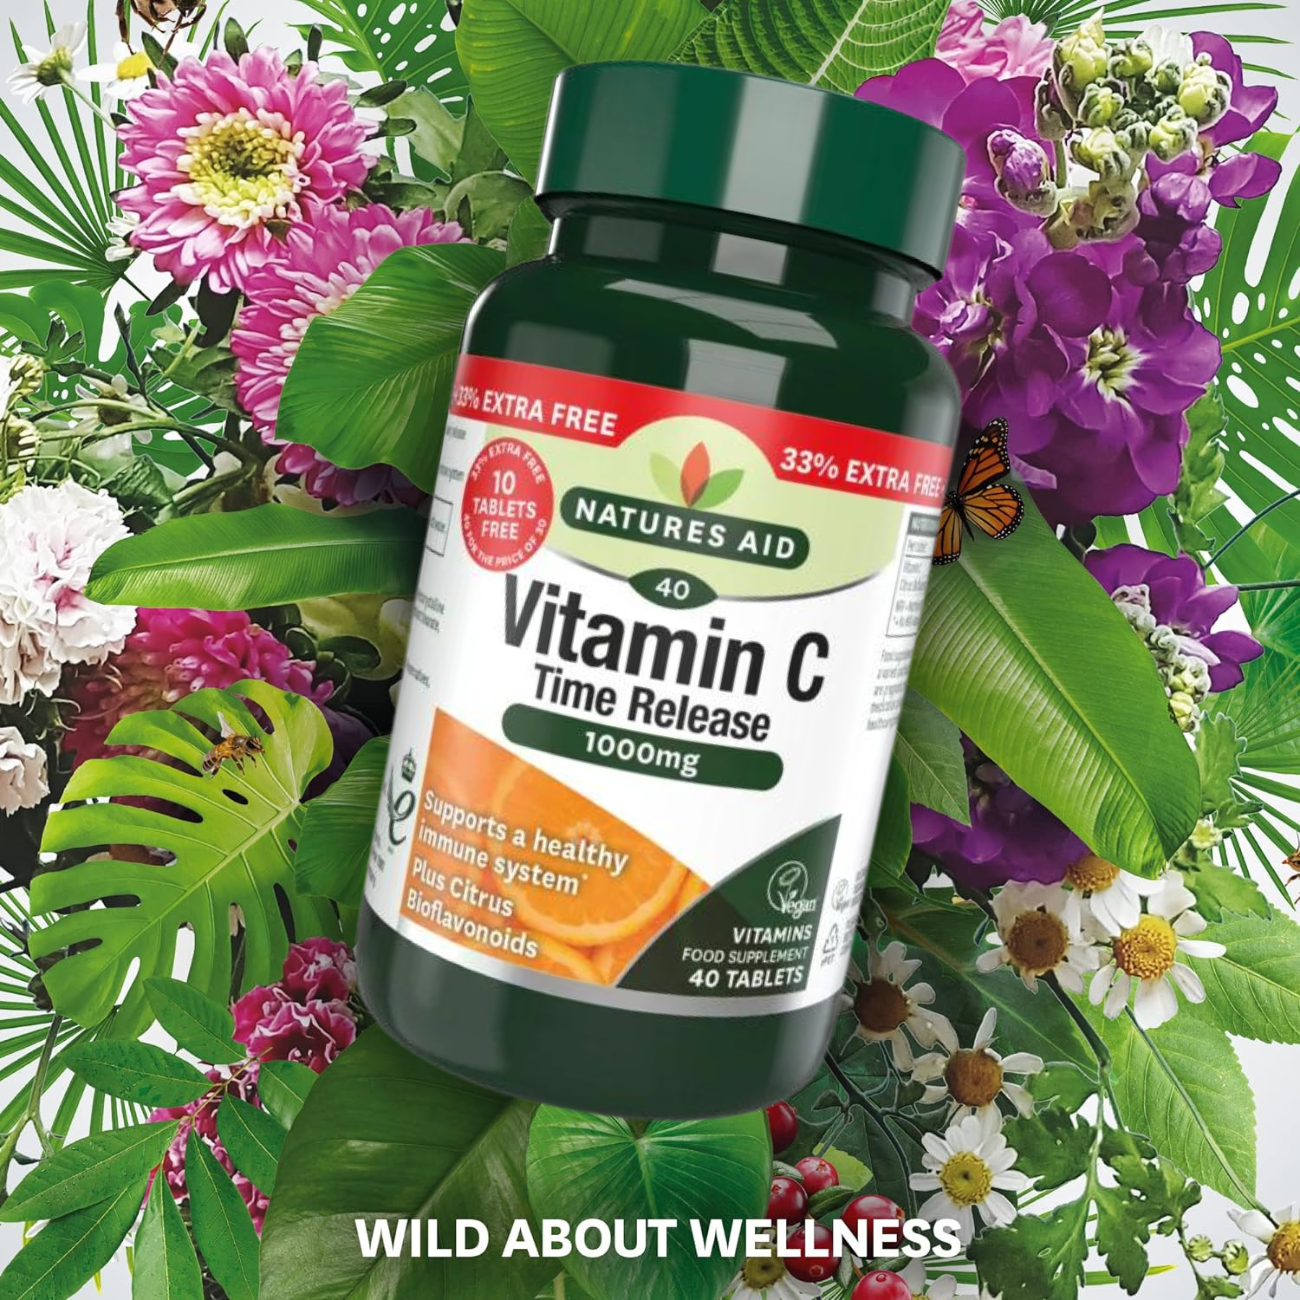 Natures Aid Vitamin C 1000mg with Citrus Bioflavonoids 40 Tablets